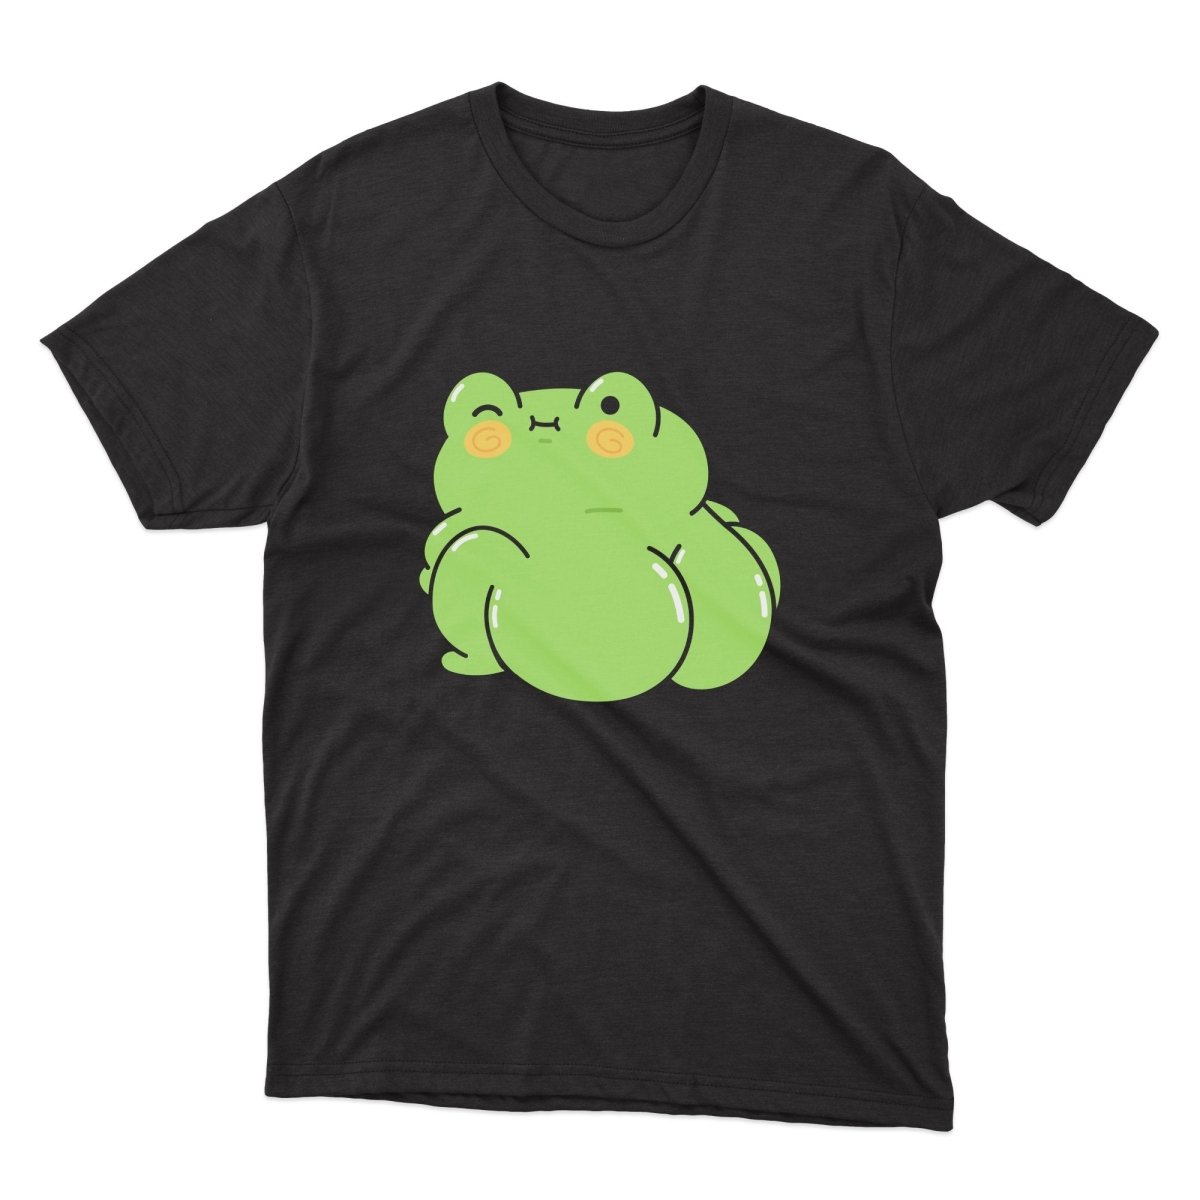 Big Booty Frog Shirt - stickerbullBig Booty Frog ShirtShirtsPrintifystickerbull31362537367696280862BlackSa black t - shirt with a green frog on it